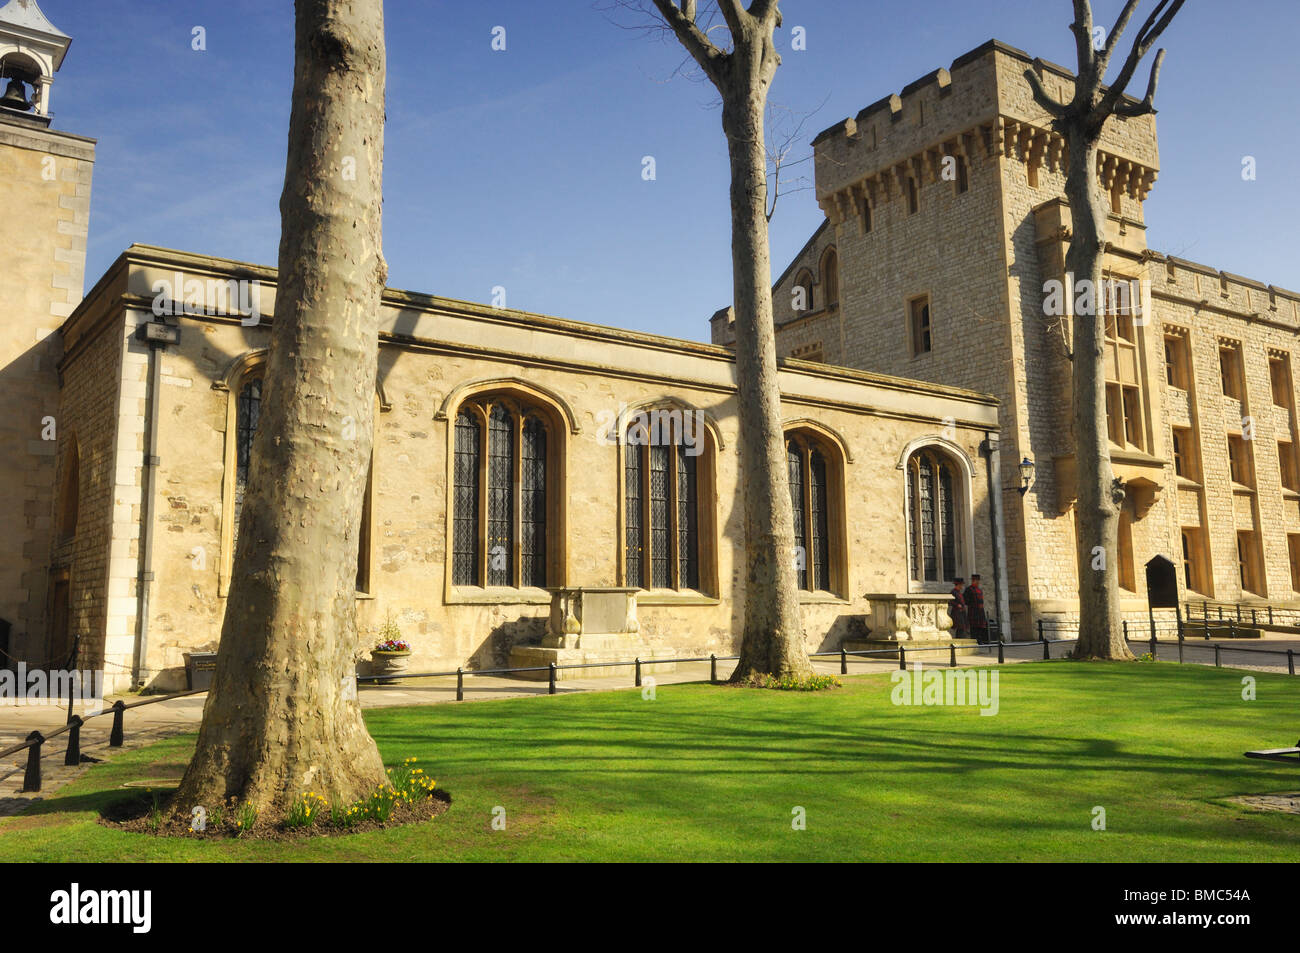 Chapel Royal of St Peter ad Vincula at the Tower of London - London, United Kingdom Stock Photo